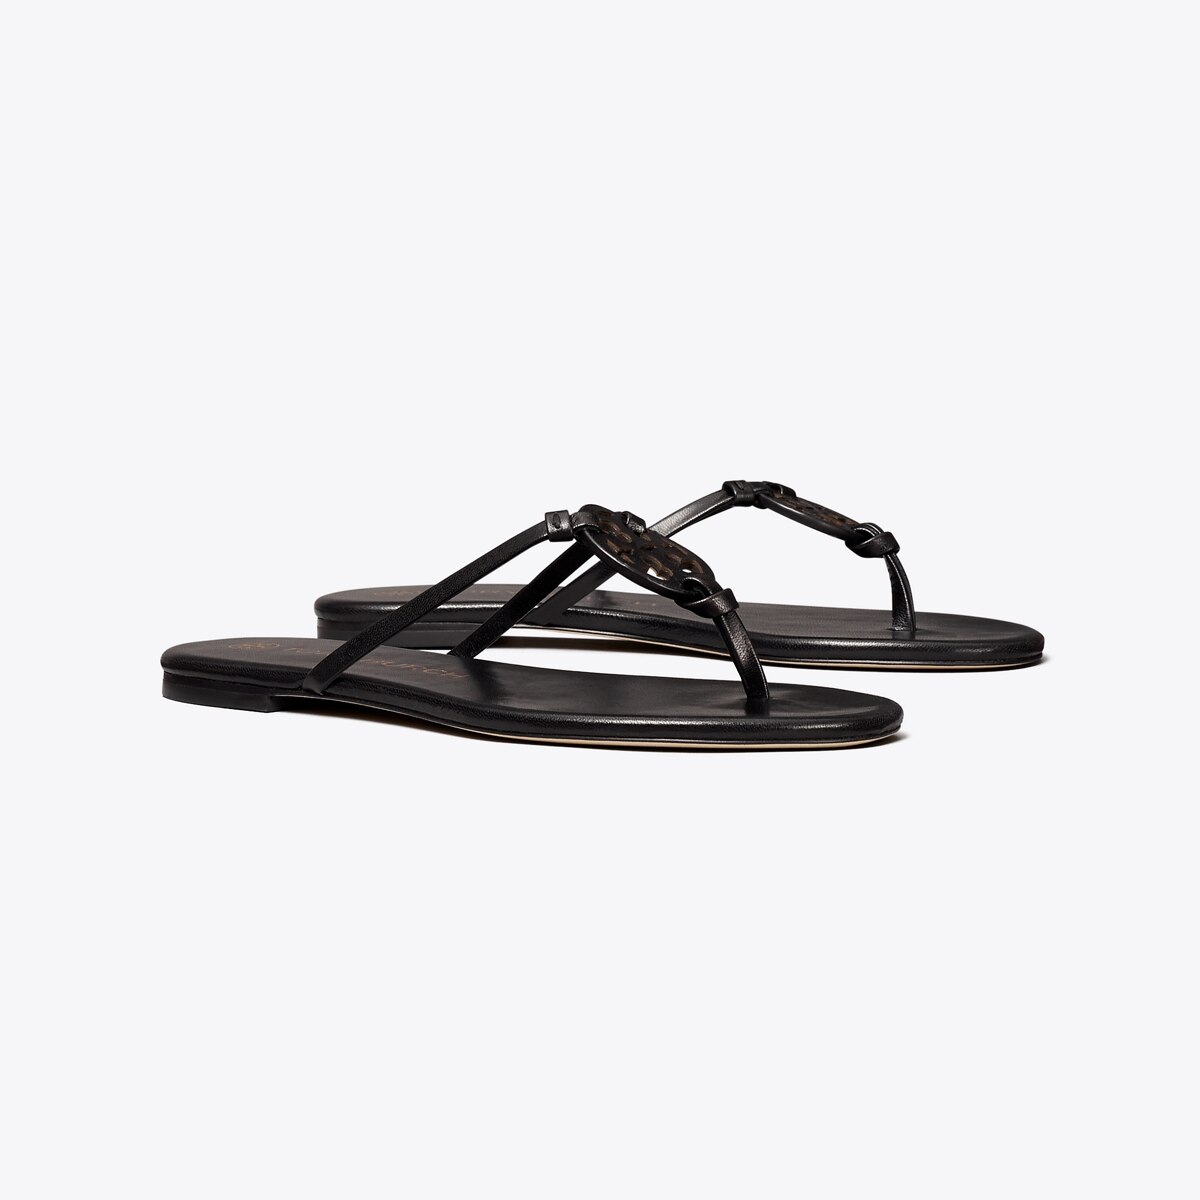 Miller Knotted Sandal: Women's Shoes | Sandals | Tory Burch UK